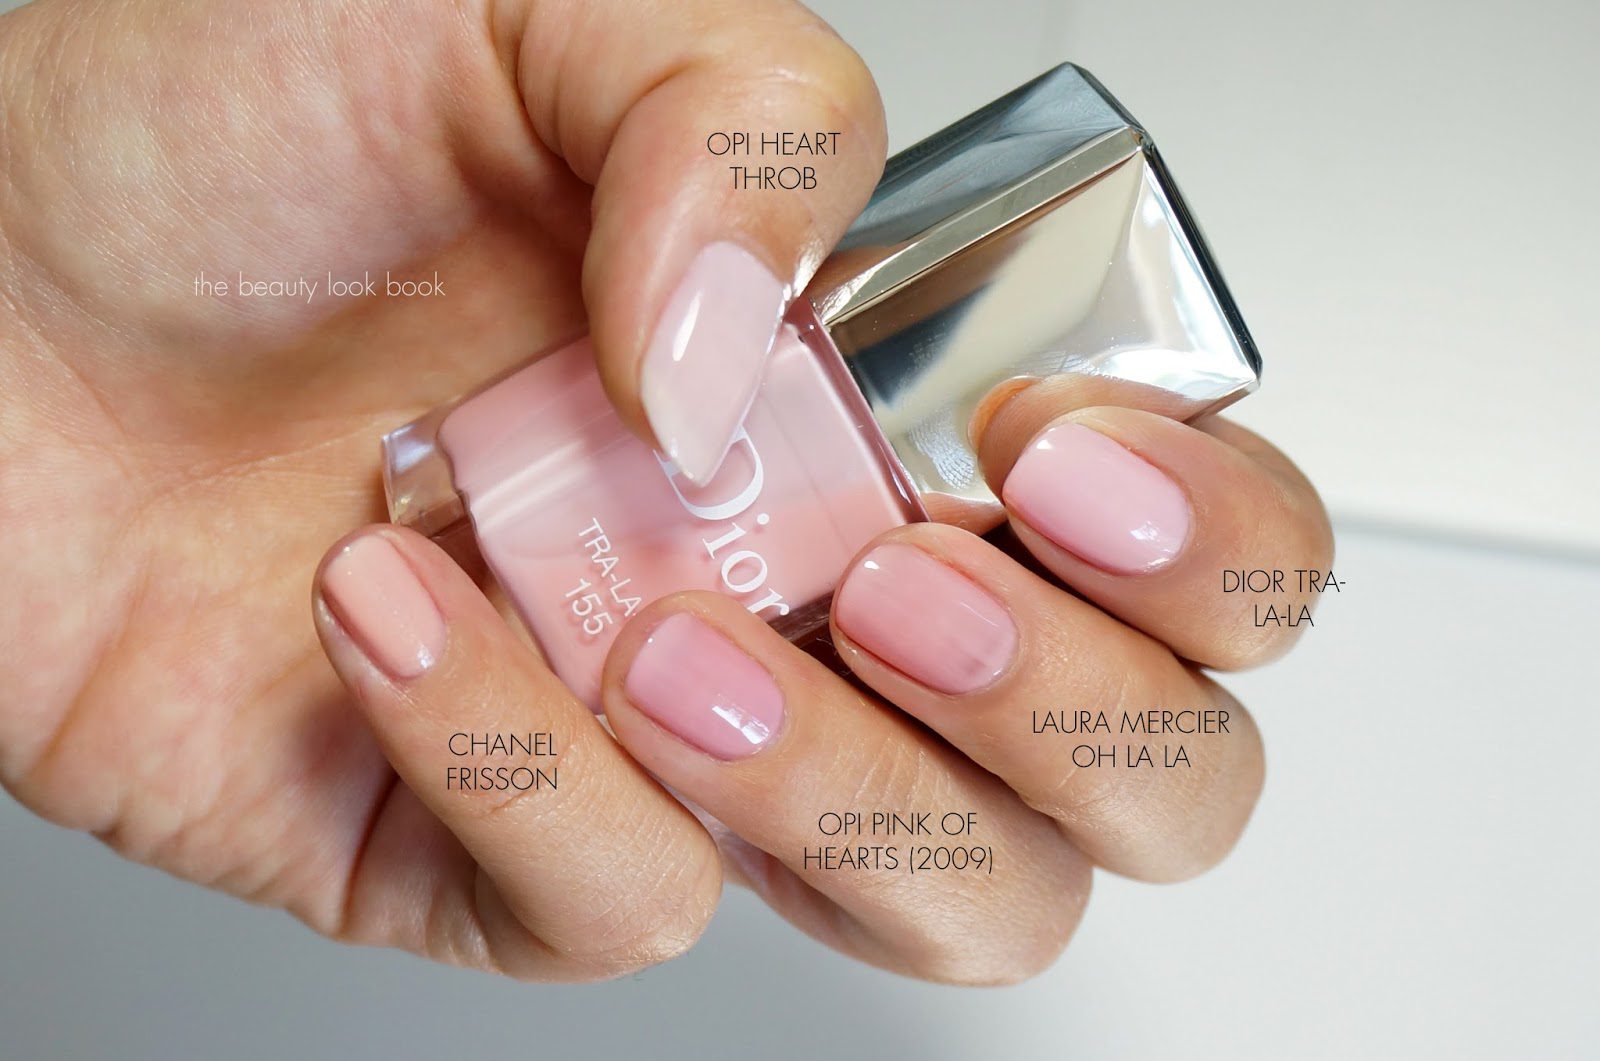 5. Dior Vernis Gel Shine and Long Wear Nail Lacquer - wide 8